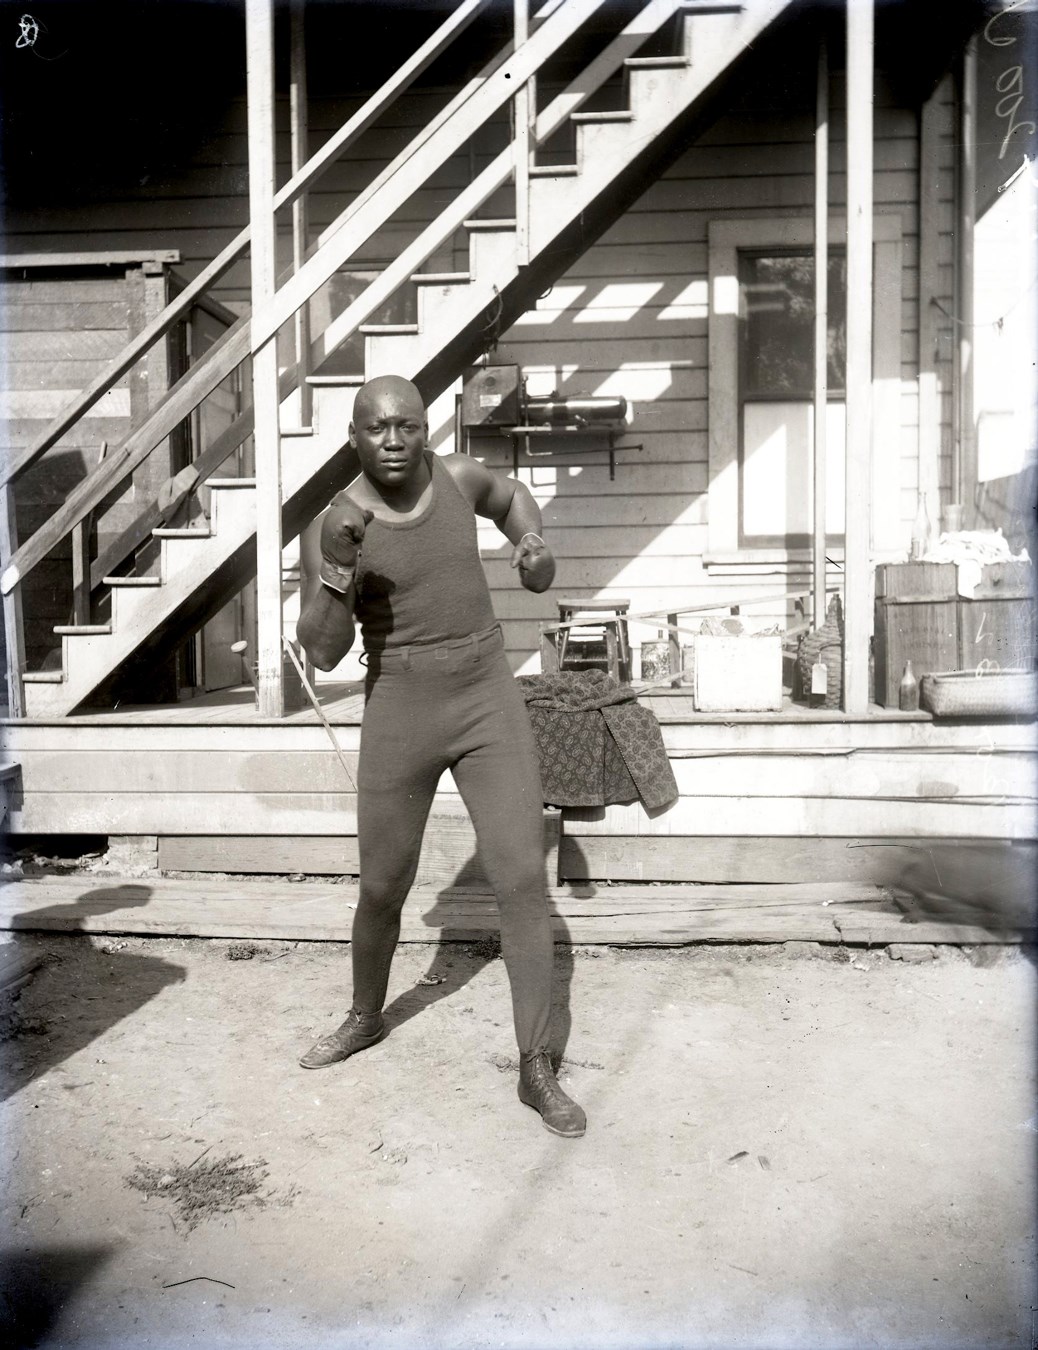 Dana Collection Of Important Boxing Negatives - 1910 Jack Johnson "Prepping for Jeffries Battle Boxing Pose" Type I Glass Plate Negative by Dana Studio